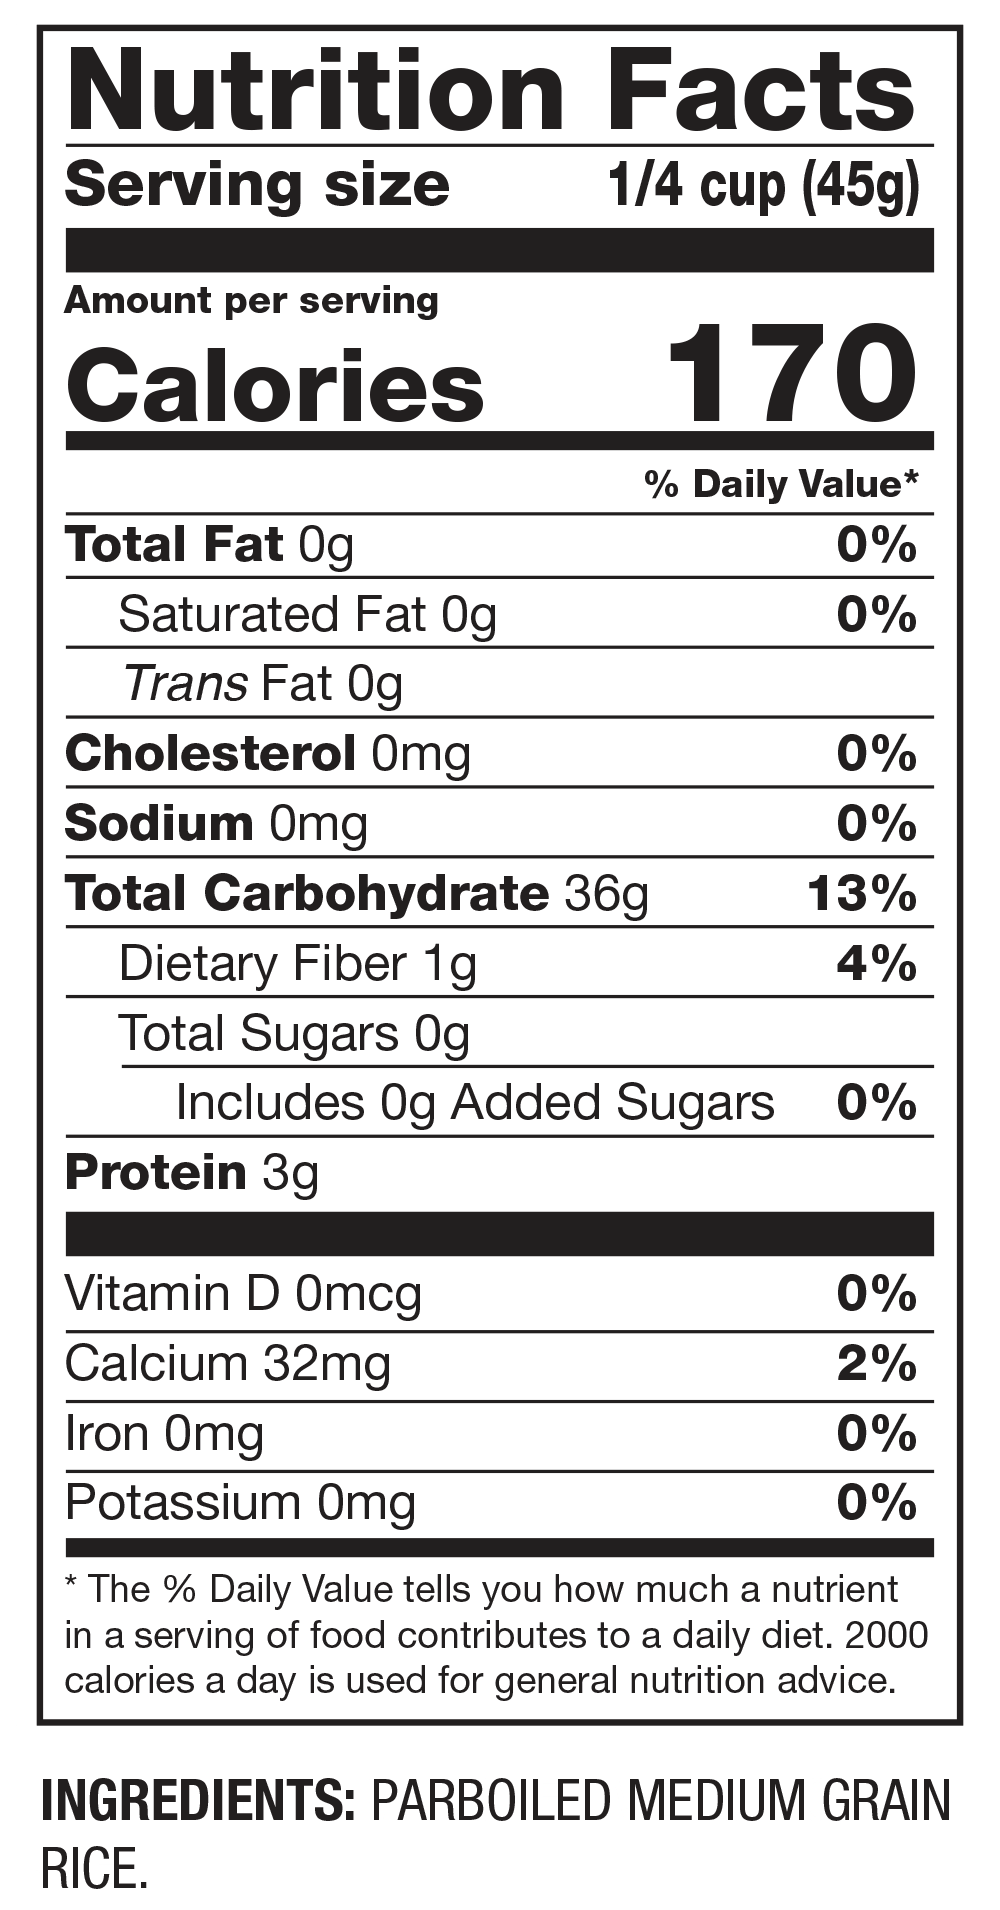 Nutrition Facts Authentic Parboiled Medium Grain Rice for Paella